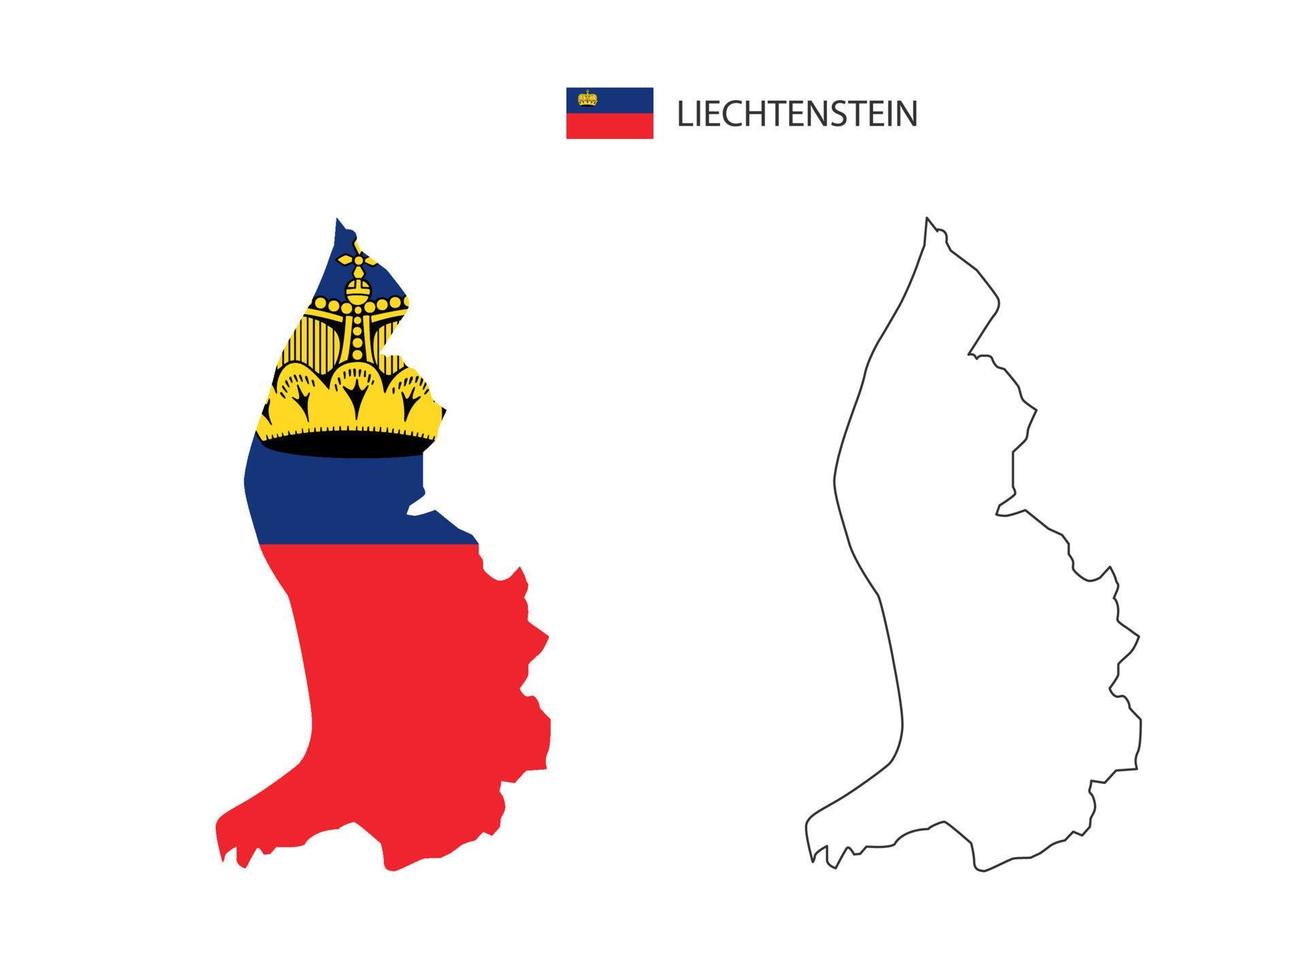 Liechtenstein map city vector divided by outline simplicity style. Have 2 versions, black thin line version and color of country flag version. Both map were on the white background.